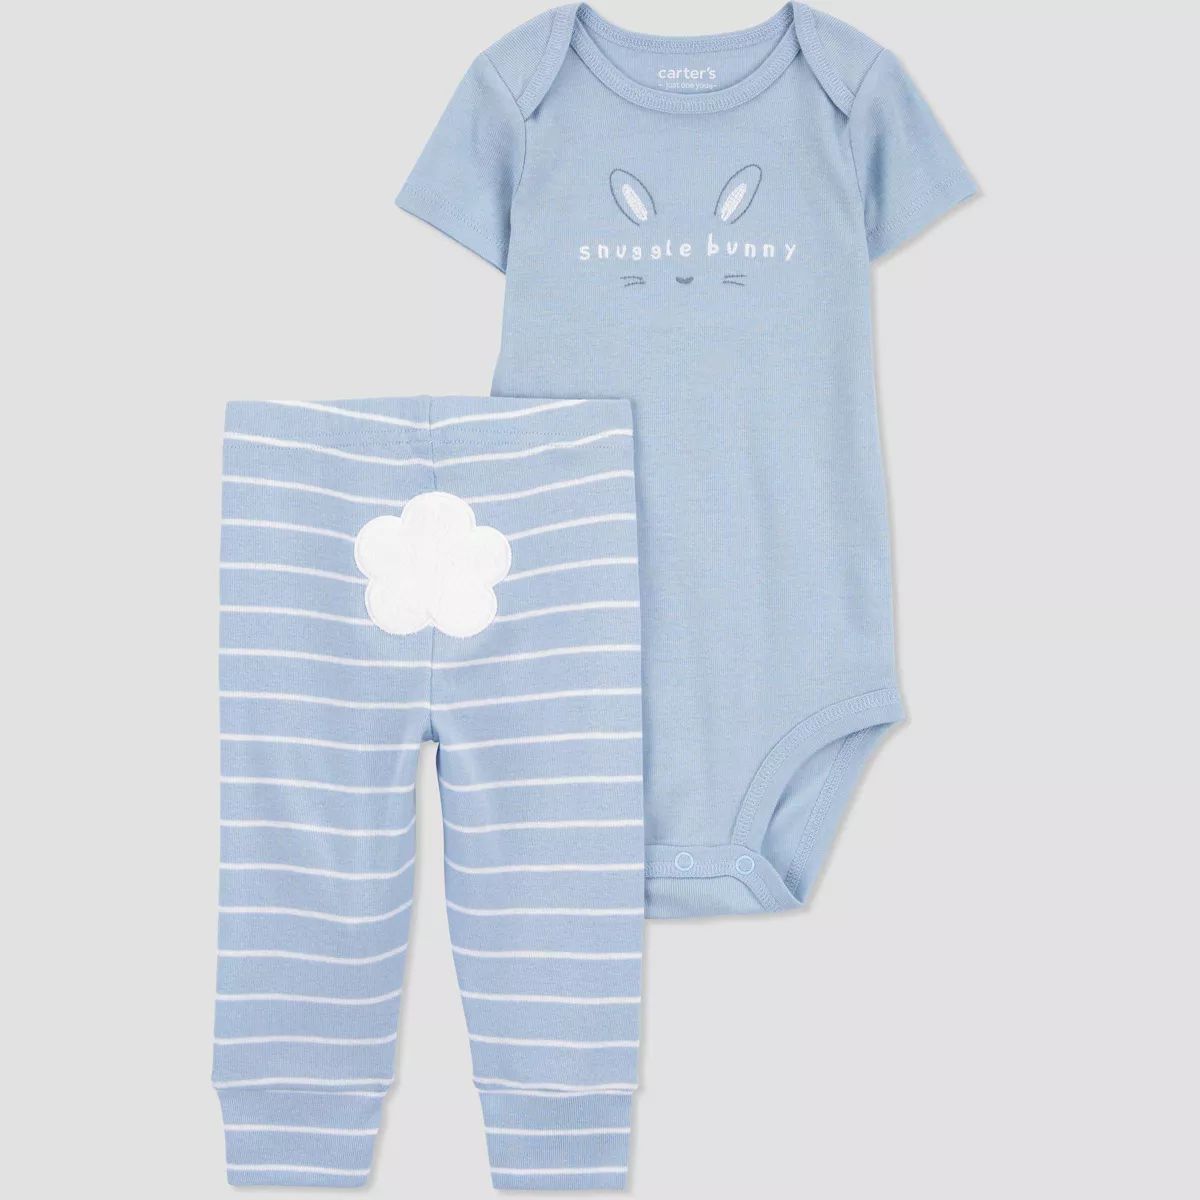 Carter's Just One You® Baby 2pc Snuggle Bunny Coordinate Set - Blue | Target